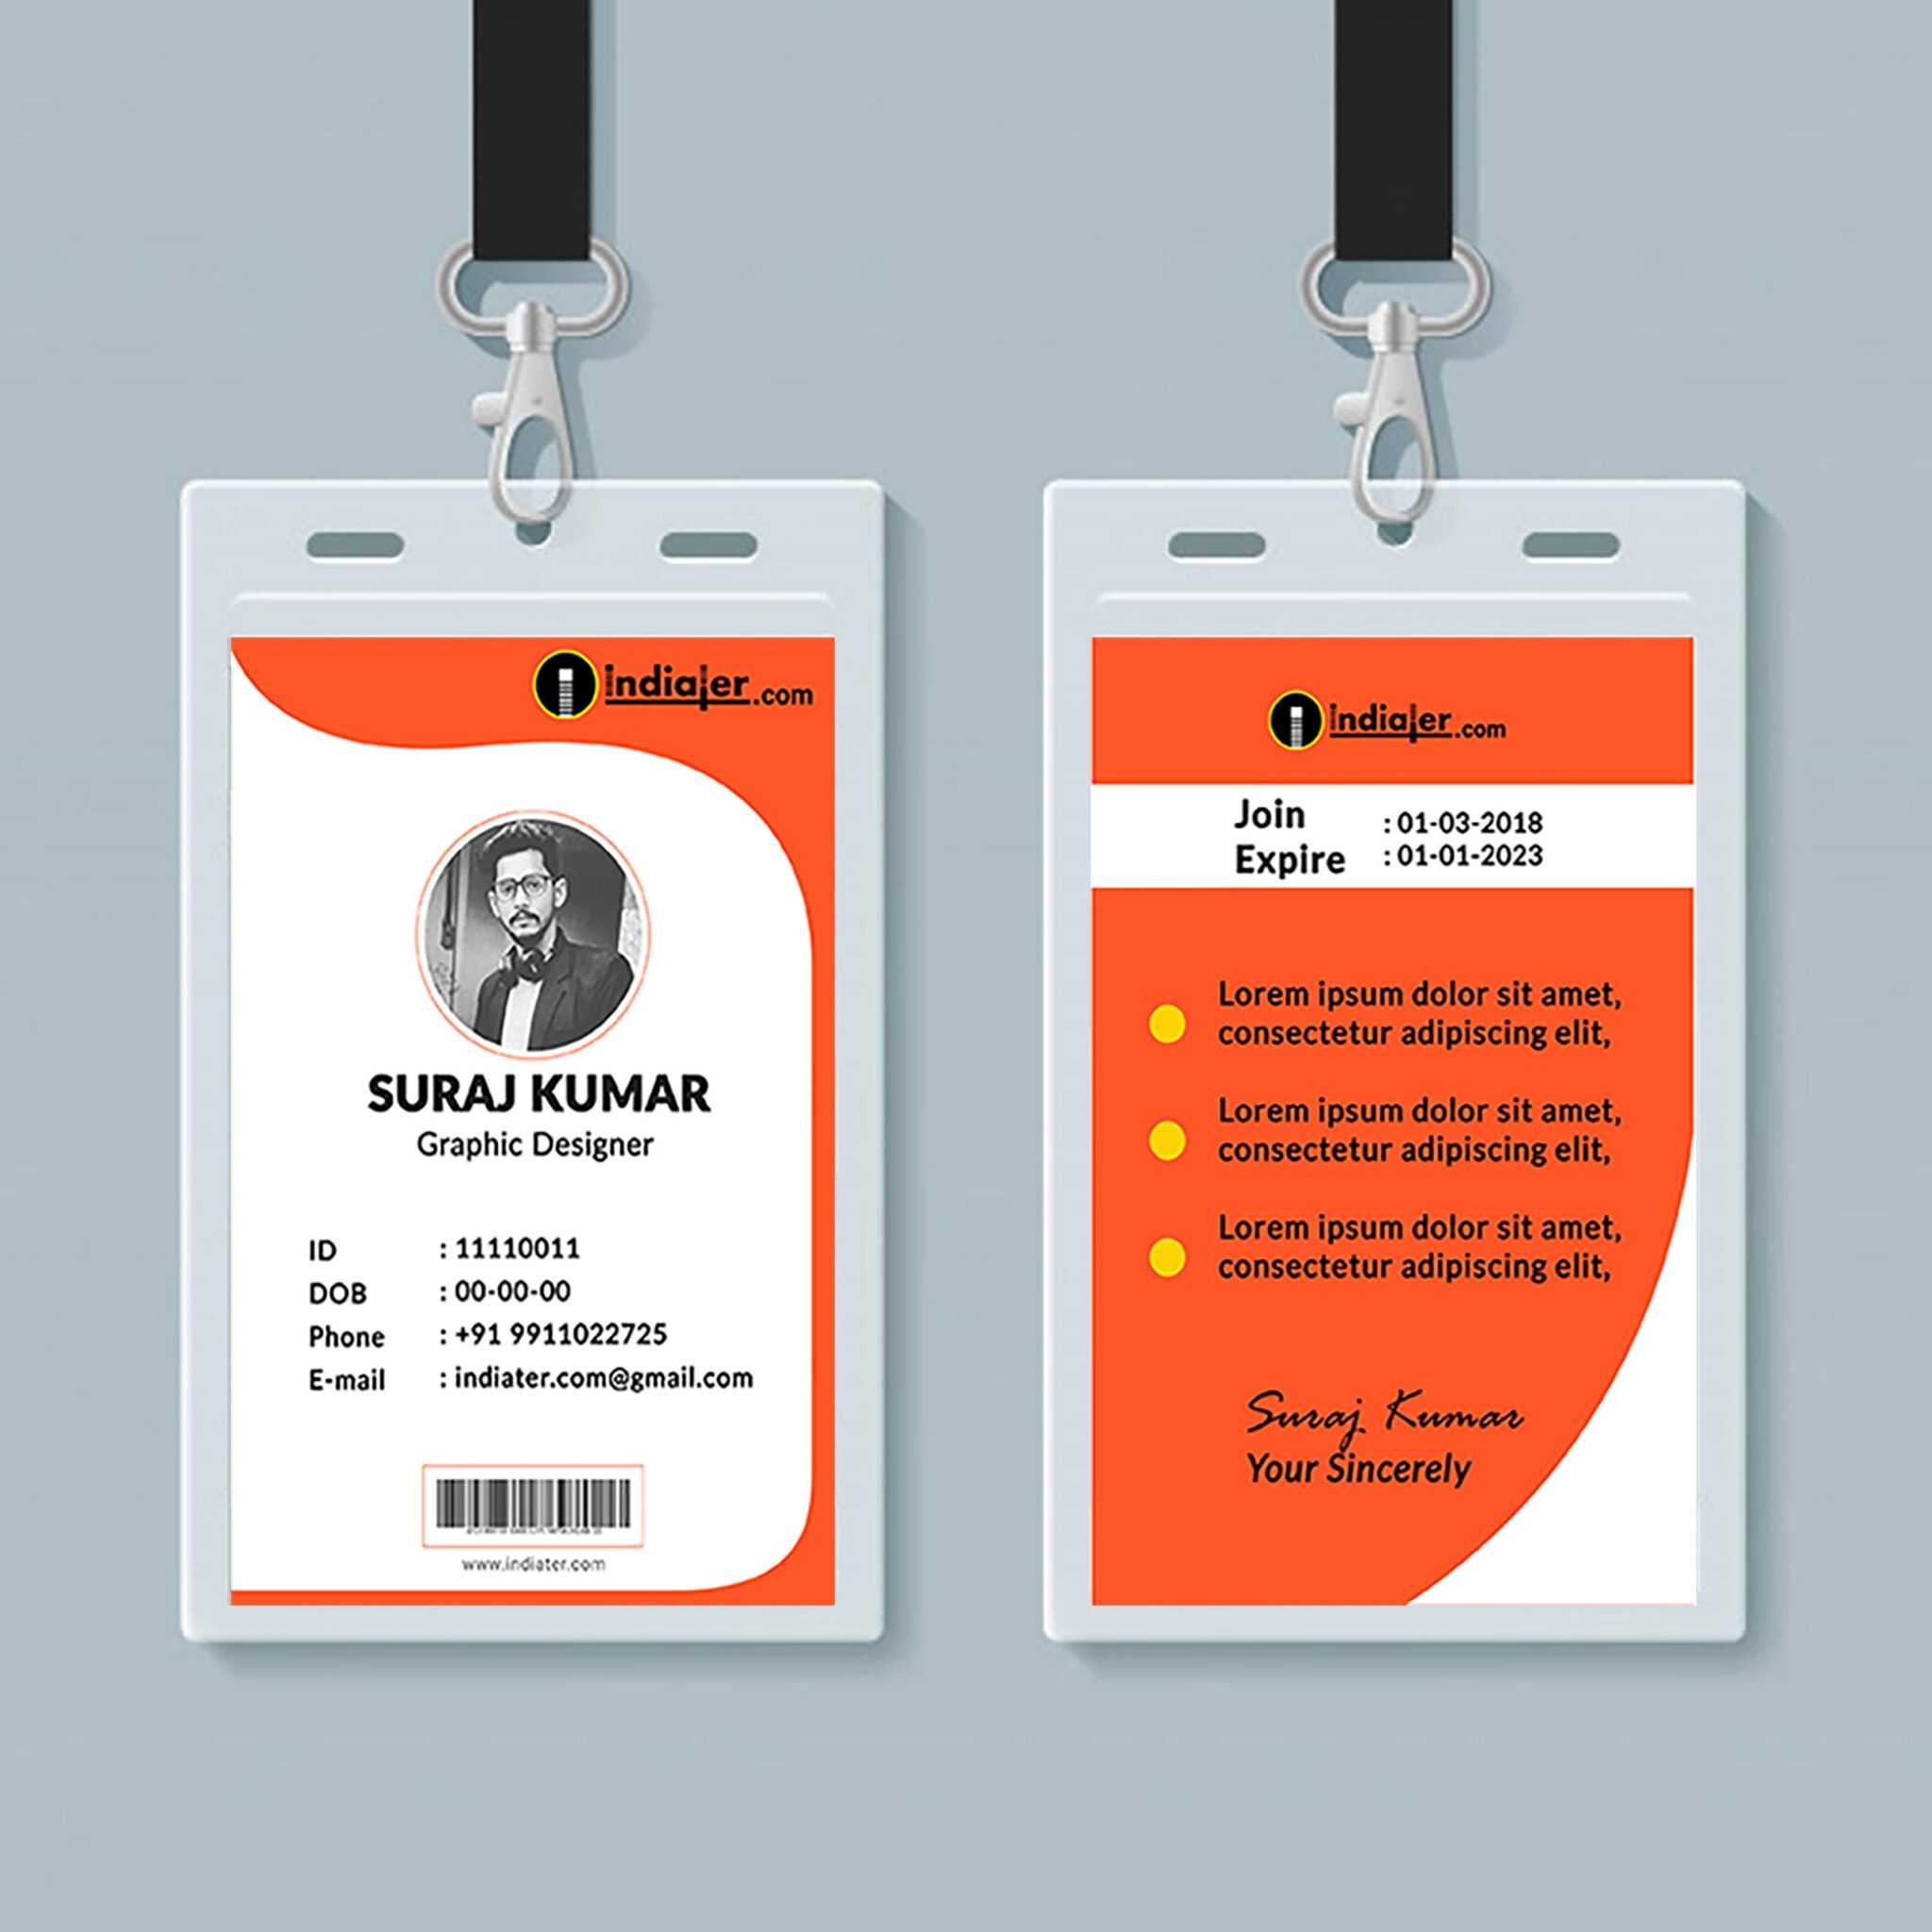 013-student-id-card-design-template-psd-free-download-pertaining-to-template-for-id-card-free